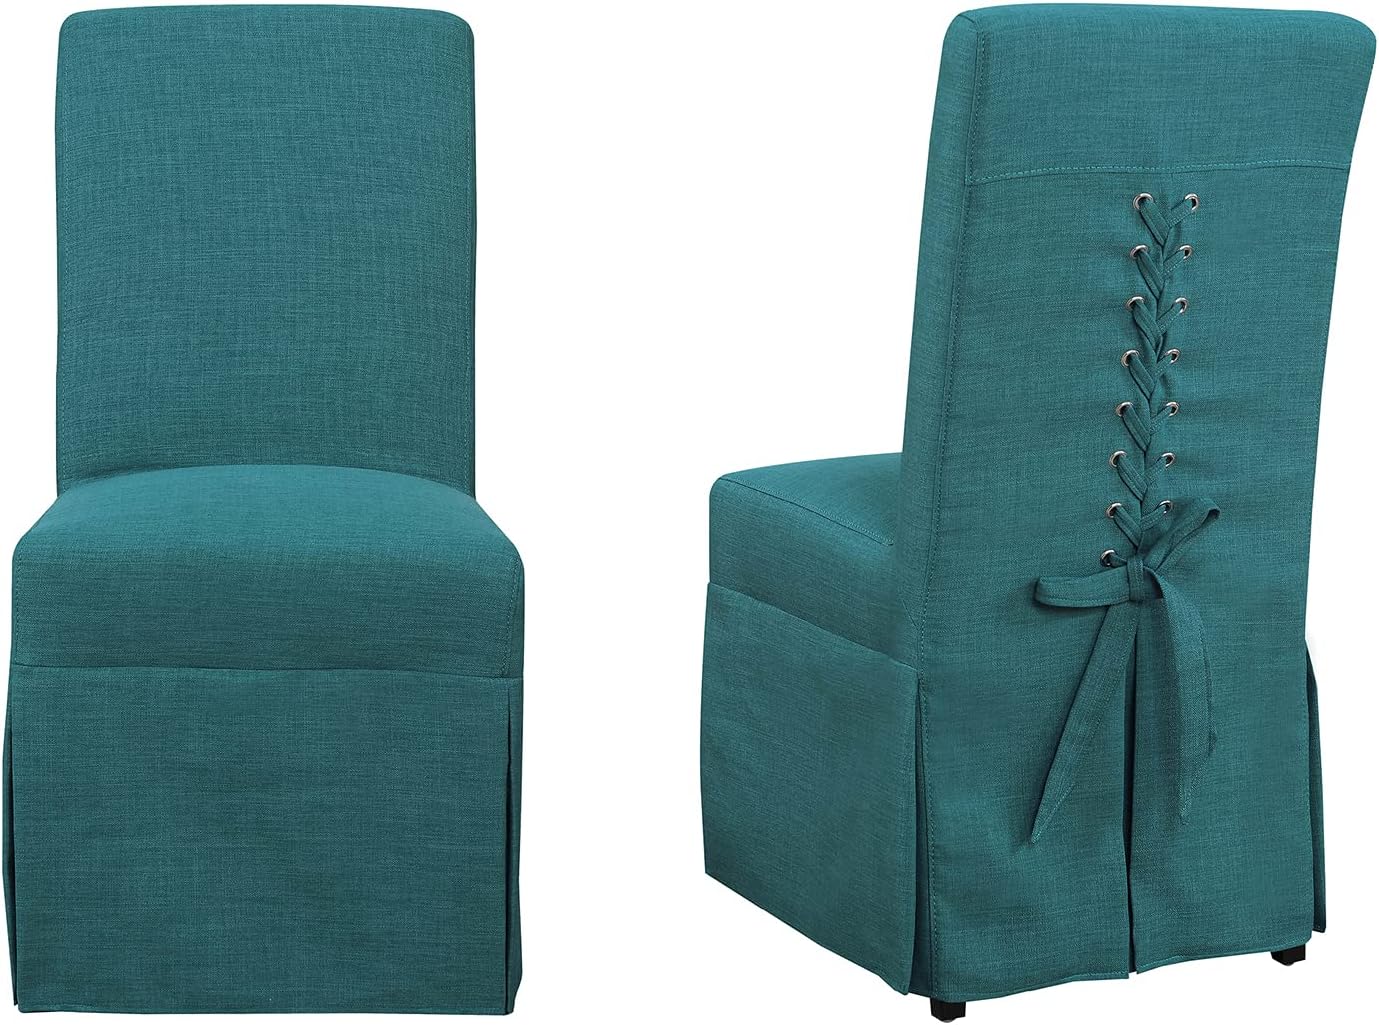 TEAL LINEN DINING CHAIRS